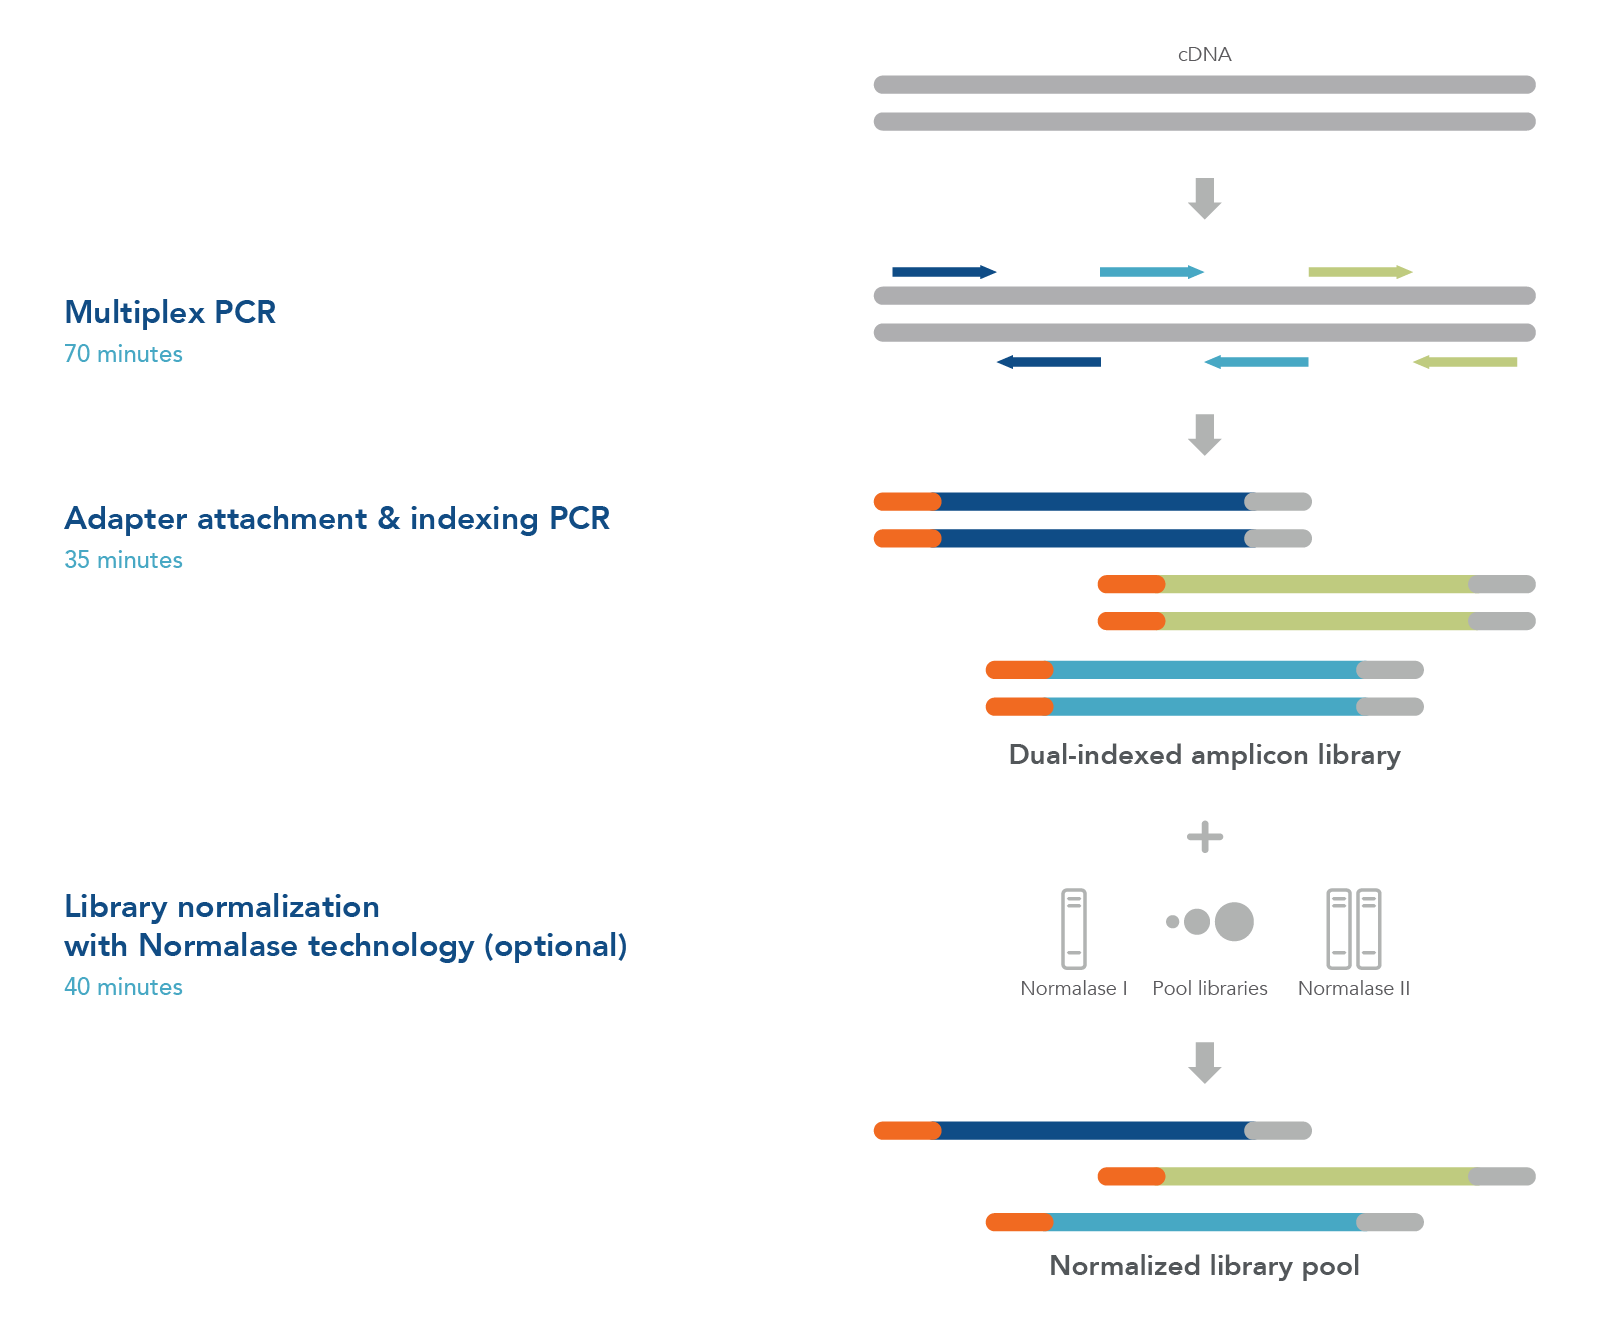 One-tube workflow prepares normalized libraries from cDNA in 3 hours by replacing qPCR library quantification with Normalase technology.